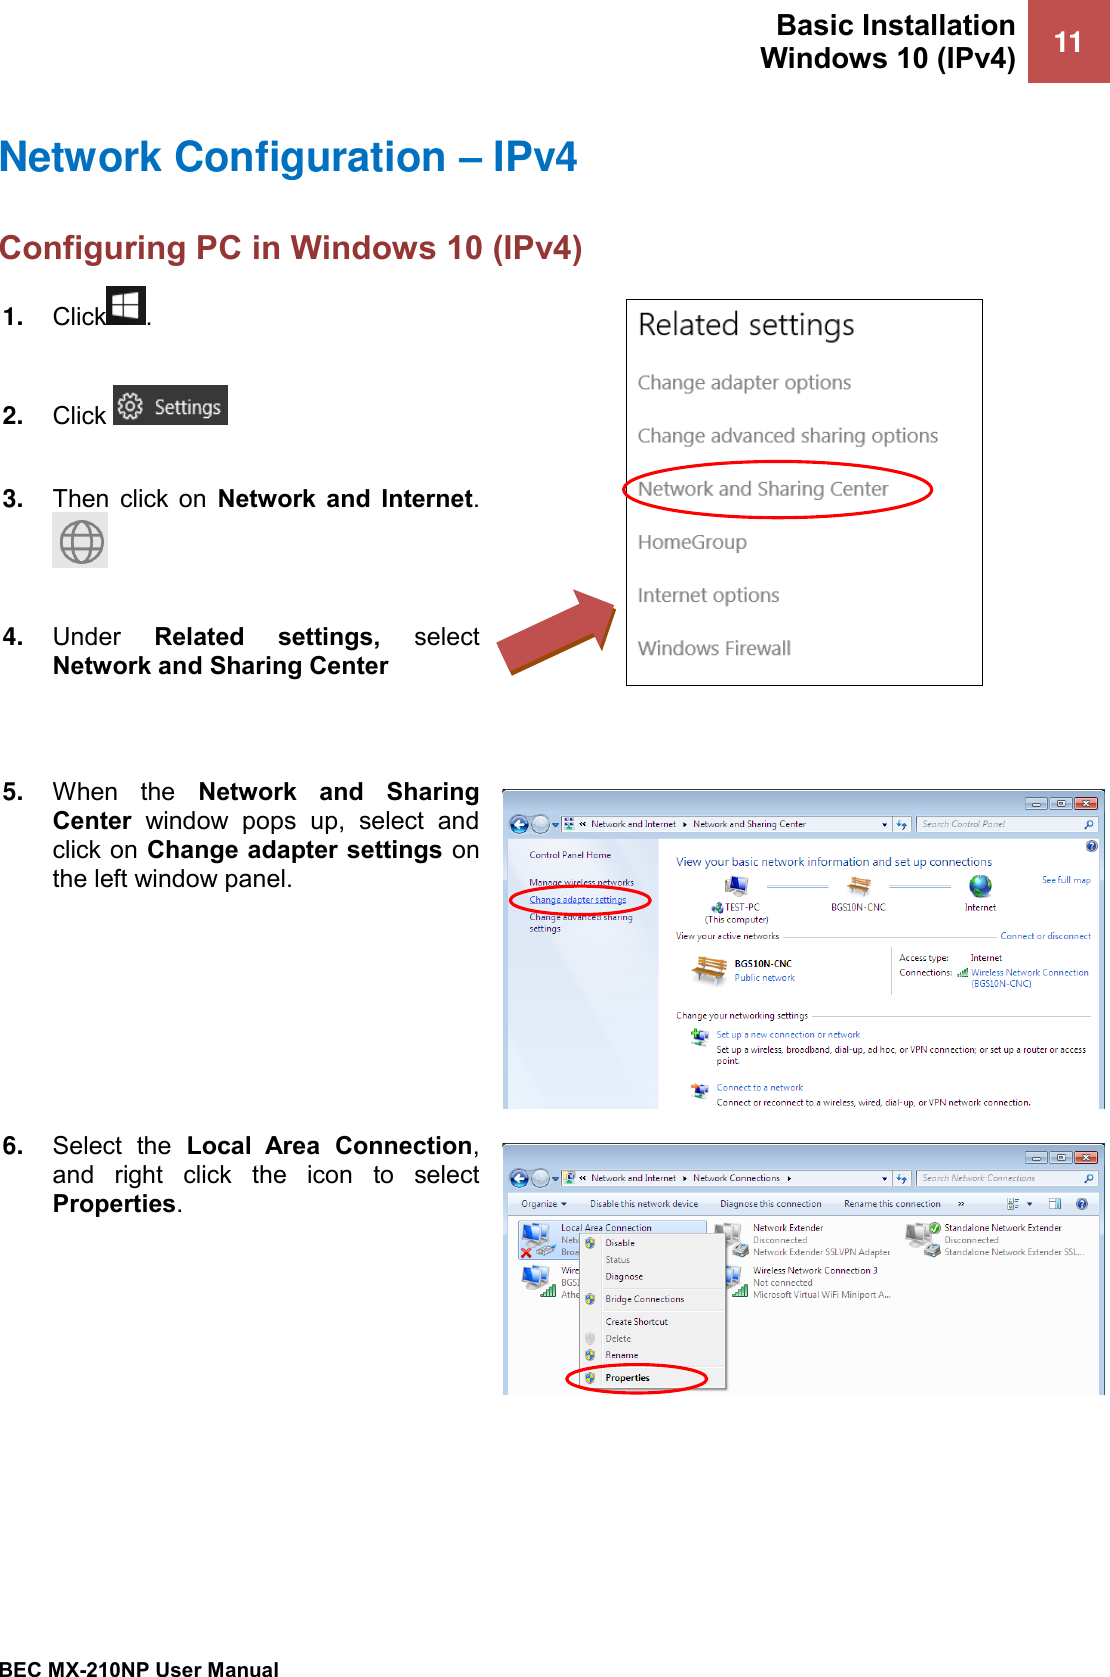 Basic Installation Windows 10 (IPv4) 11   BEC MX-210NP User Manual  Network Configuration – IPv4 Configuring PC in Windows 10 (IPv4)    1. Click .  2. Click    3. Then  click  on  Network  and  Internet.   4. Under  Related  settings,  select Network and Sharing Center    5. When  the  Network  and  Sharing Center  window  pops  up,  select  and click on Change adapter settings on the left window panel.  6. Select  the  Local  Area  Connection, and  right  click  the  icon  to  select Properties.  